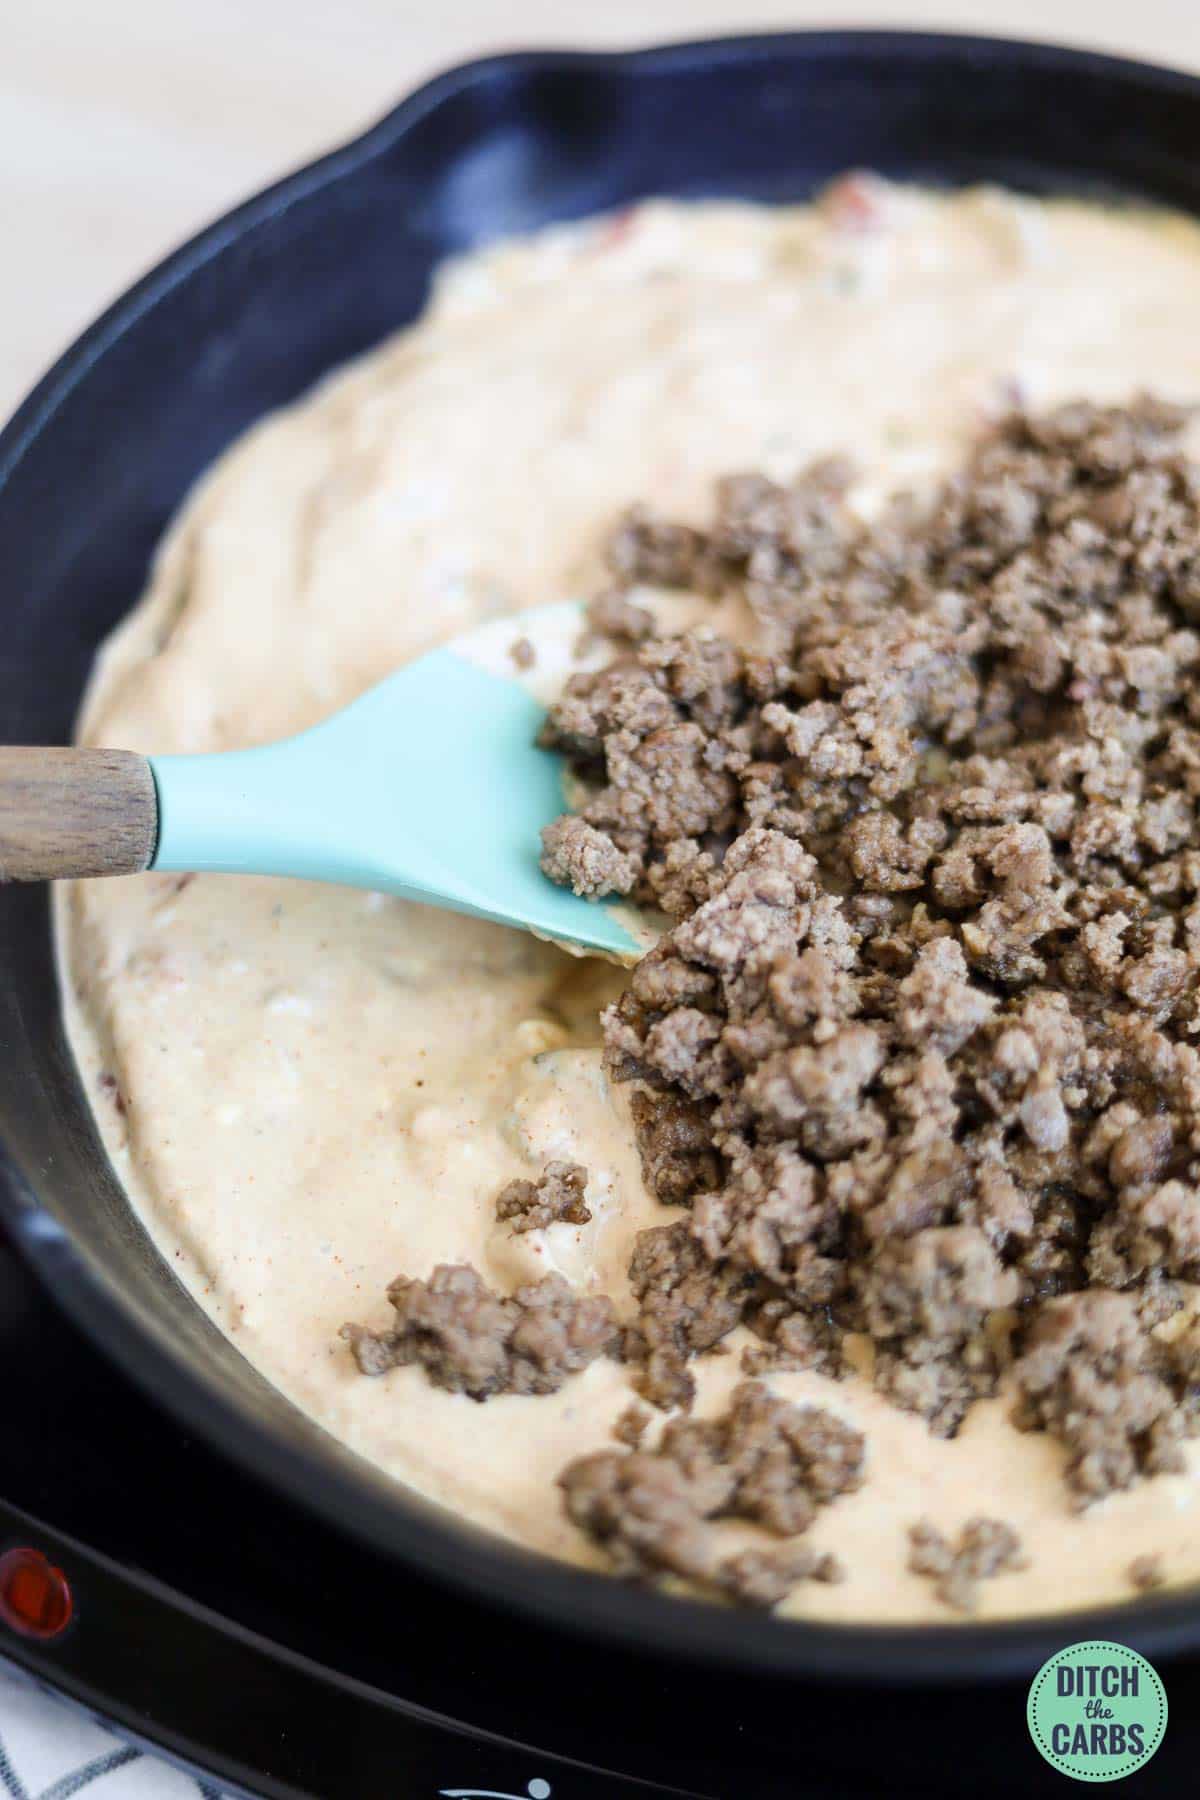 Mixing the cooked ground beef back into the queso.